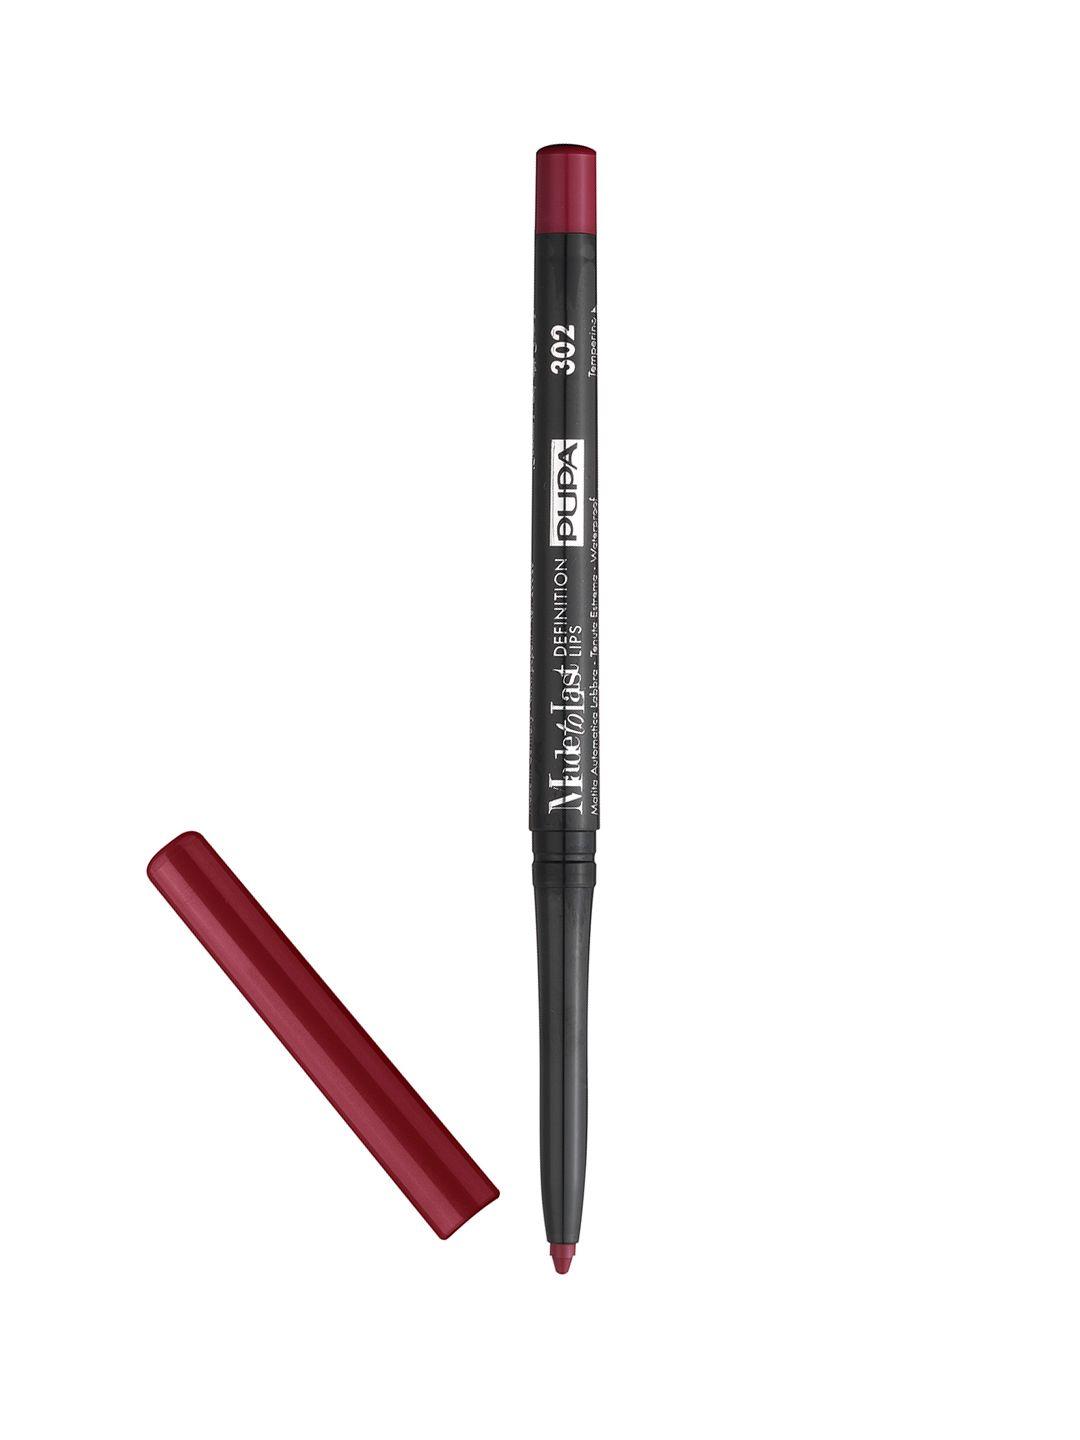 pupa milano made to last definition lips waterproof automatic lip pencil-chic burgundy 302